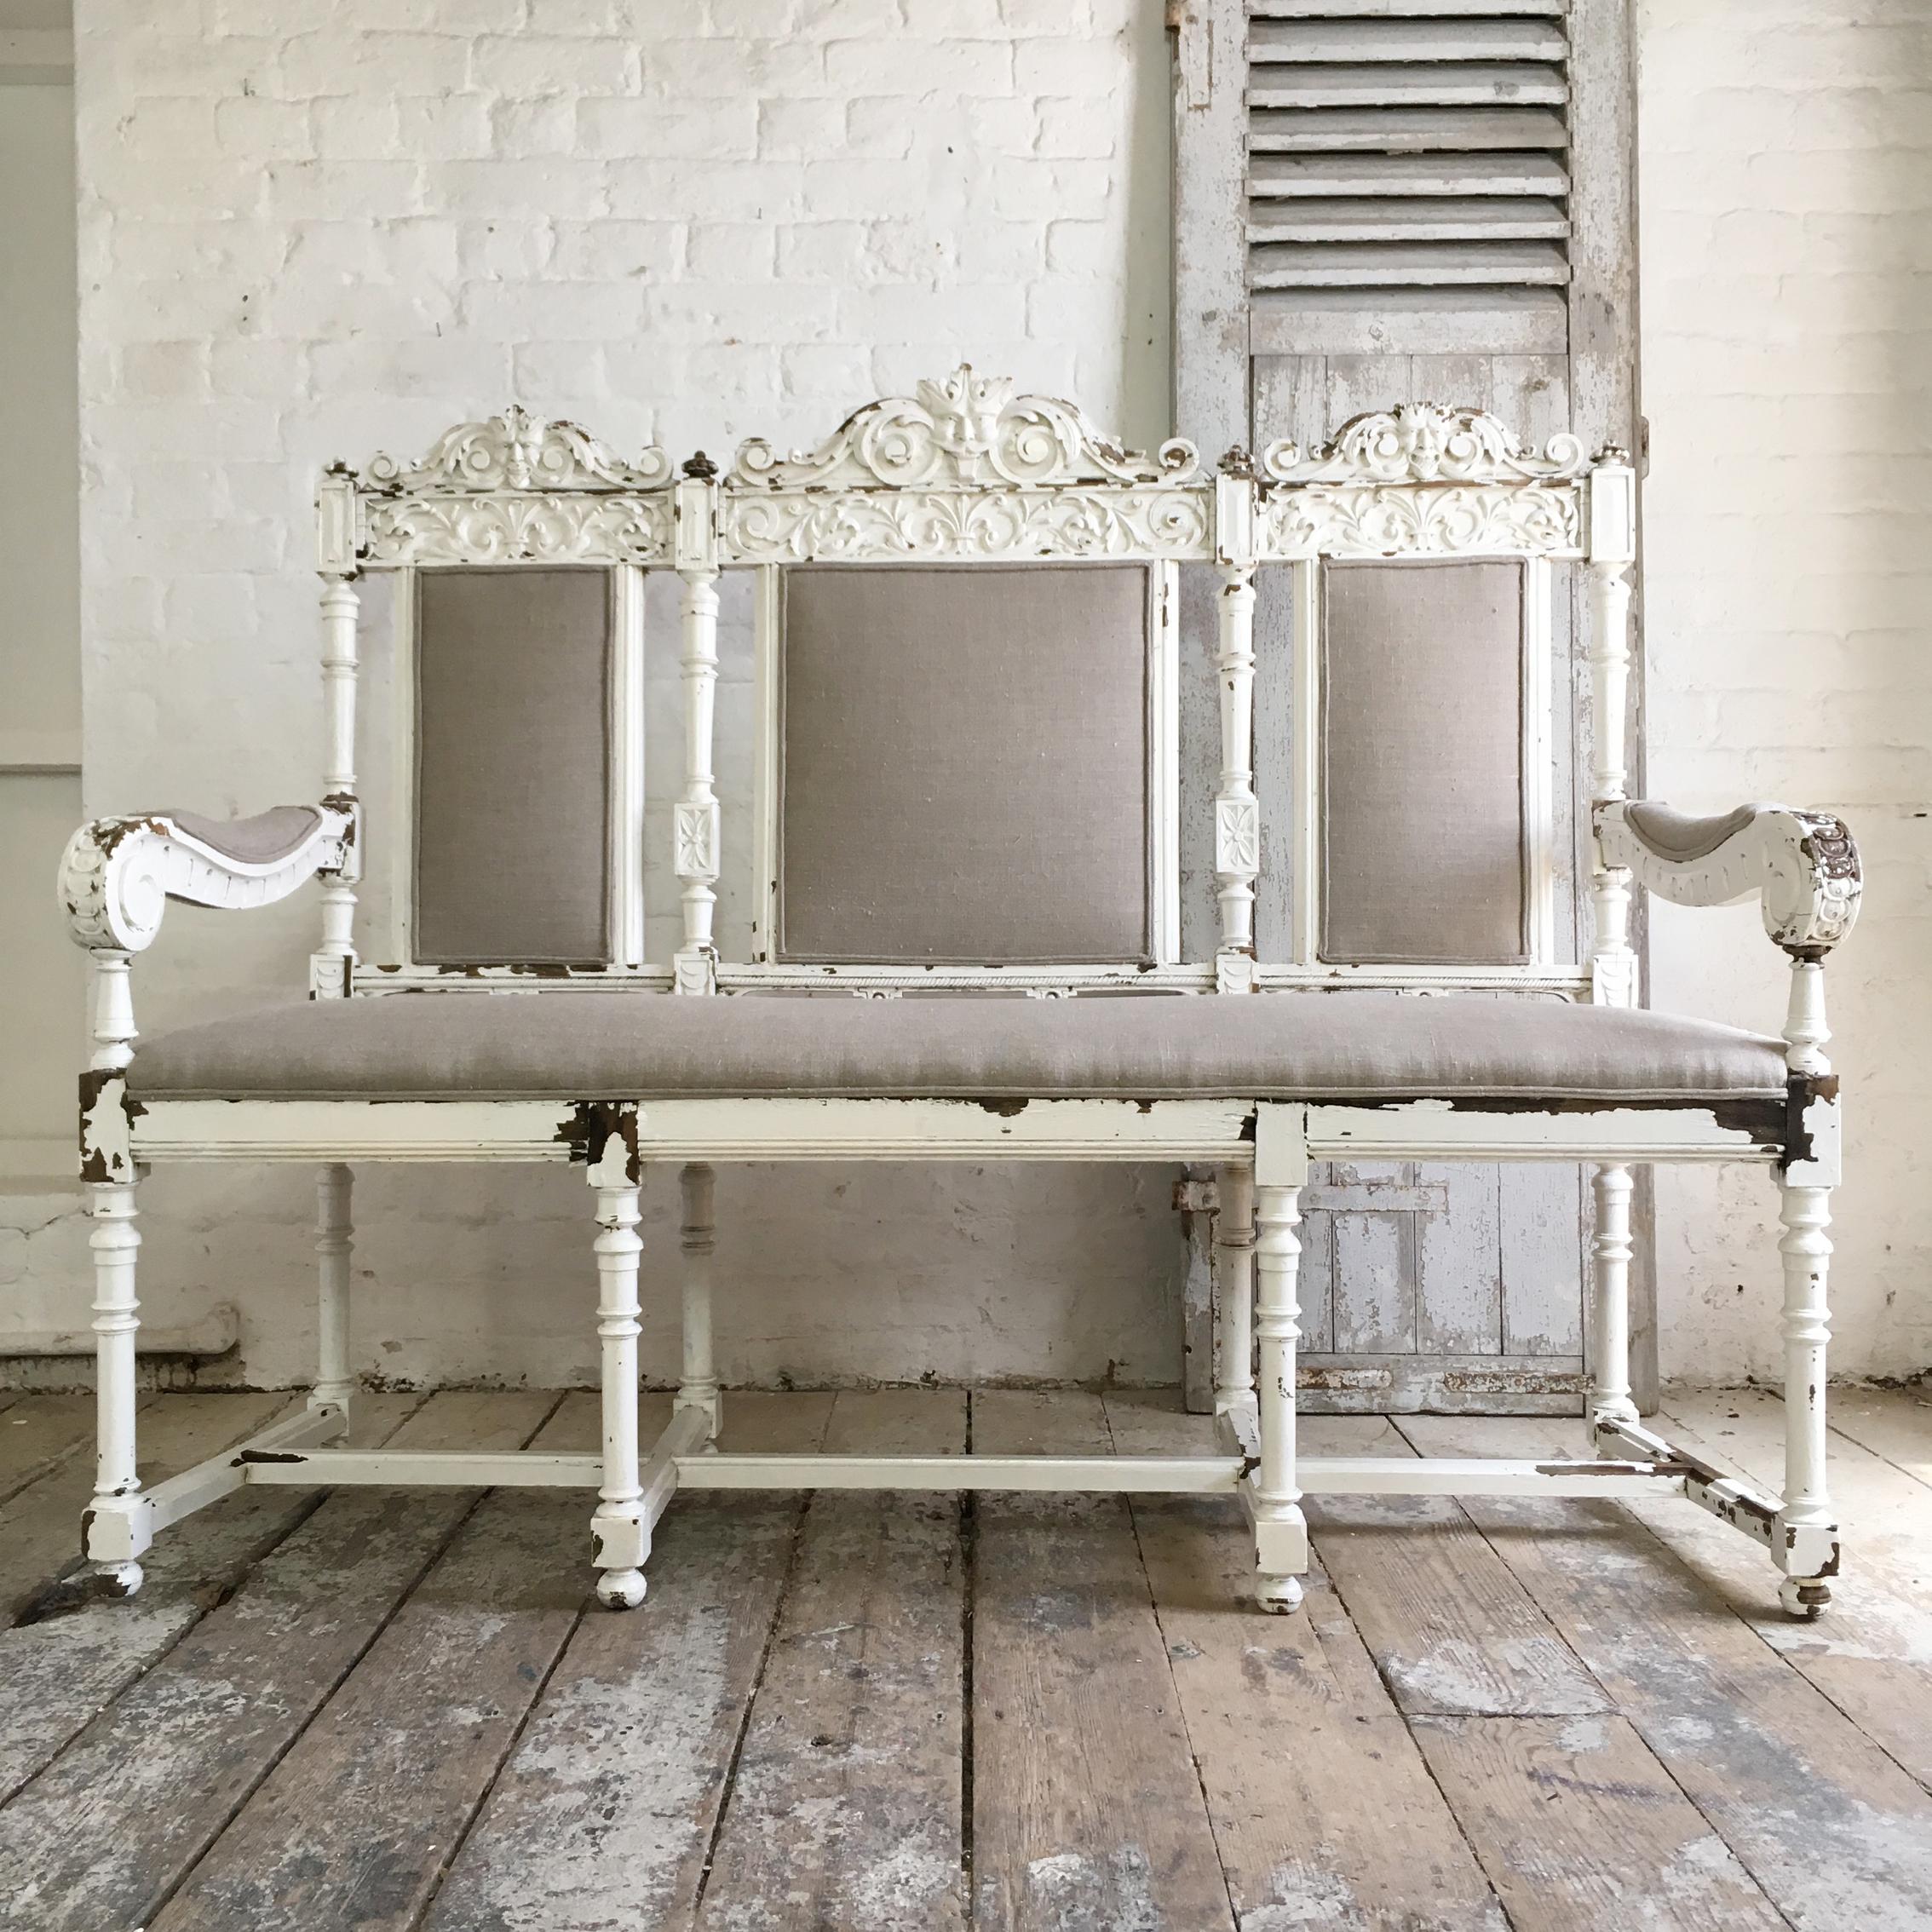 Late 18th century hand carved oak library or hall bench. Recently re-upholstered in natural linen
The bench was originally bespoke crafted for a country Chateau in Belgium in the late 1700s, the detailing on the bench would have mirrored the